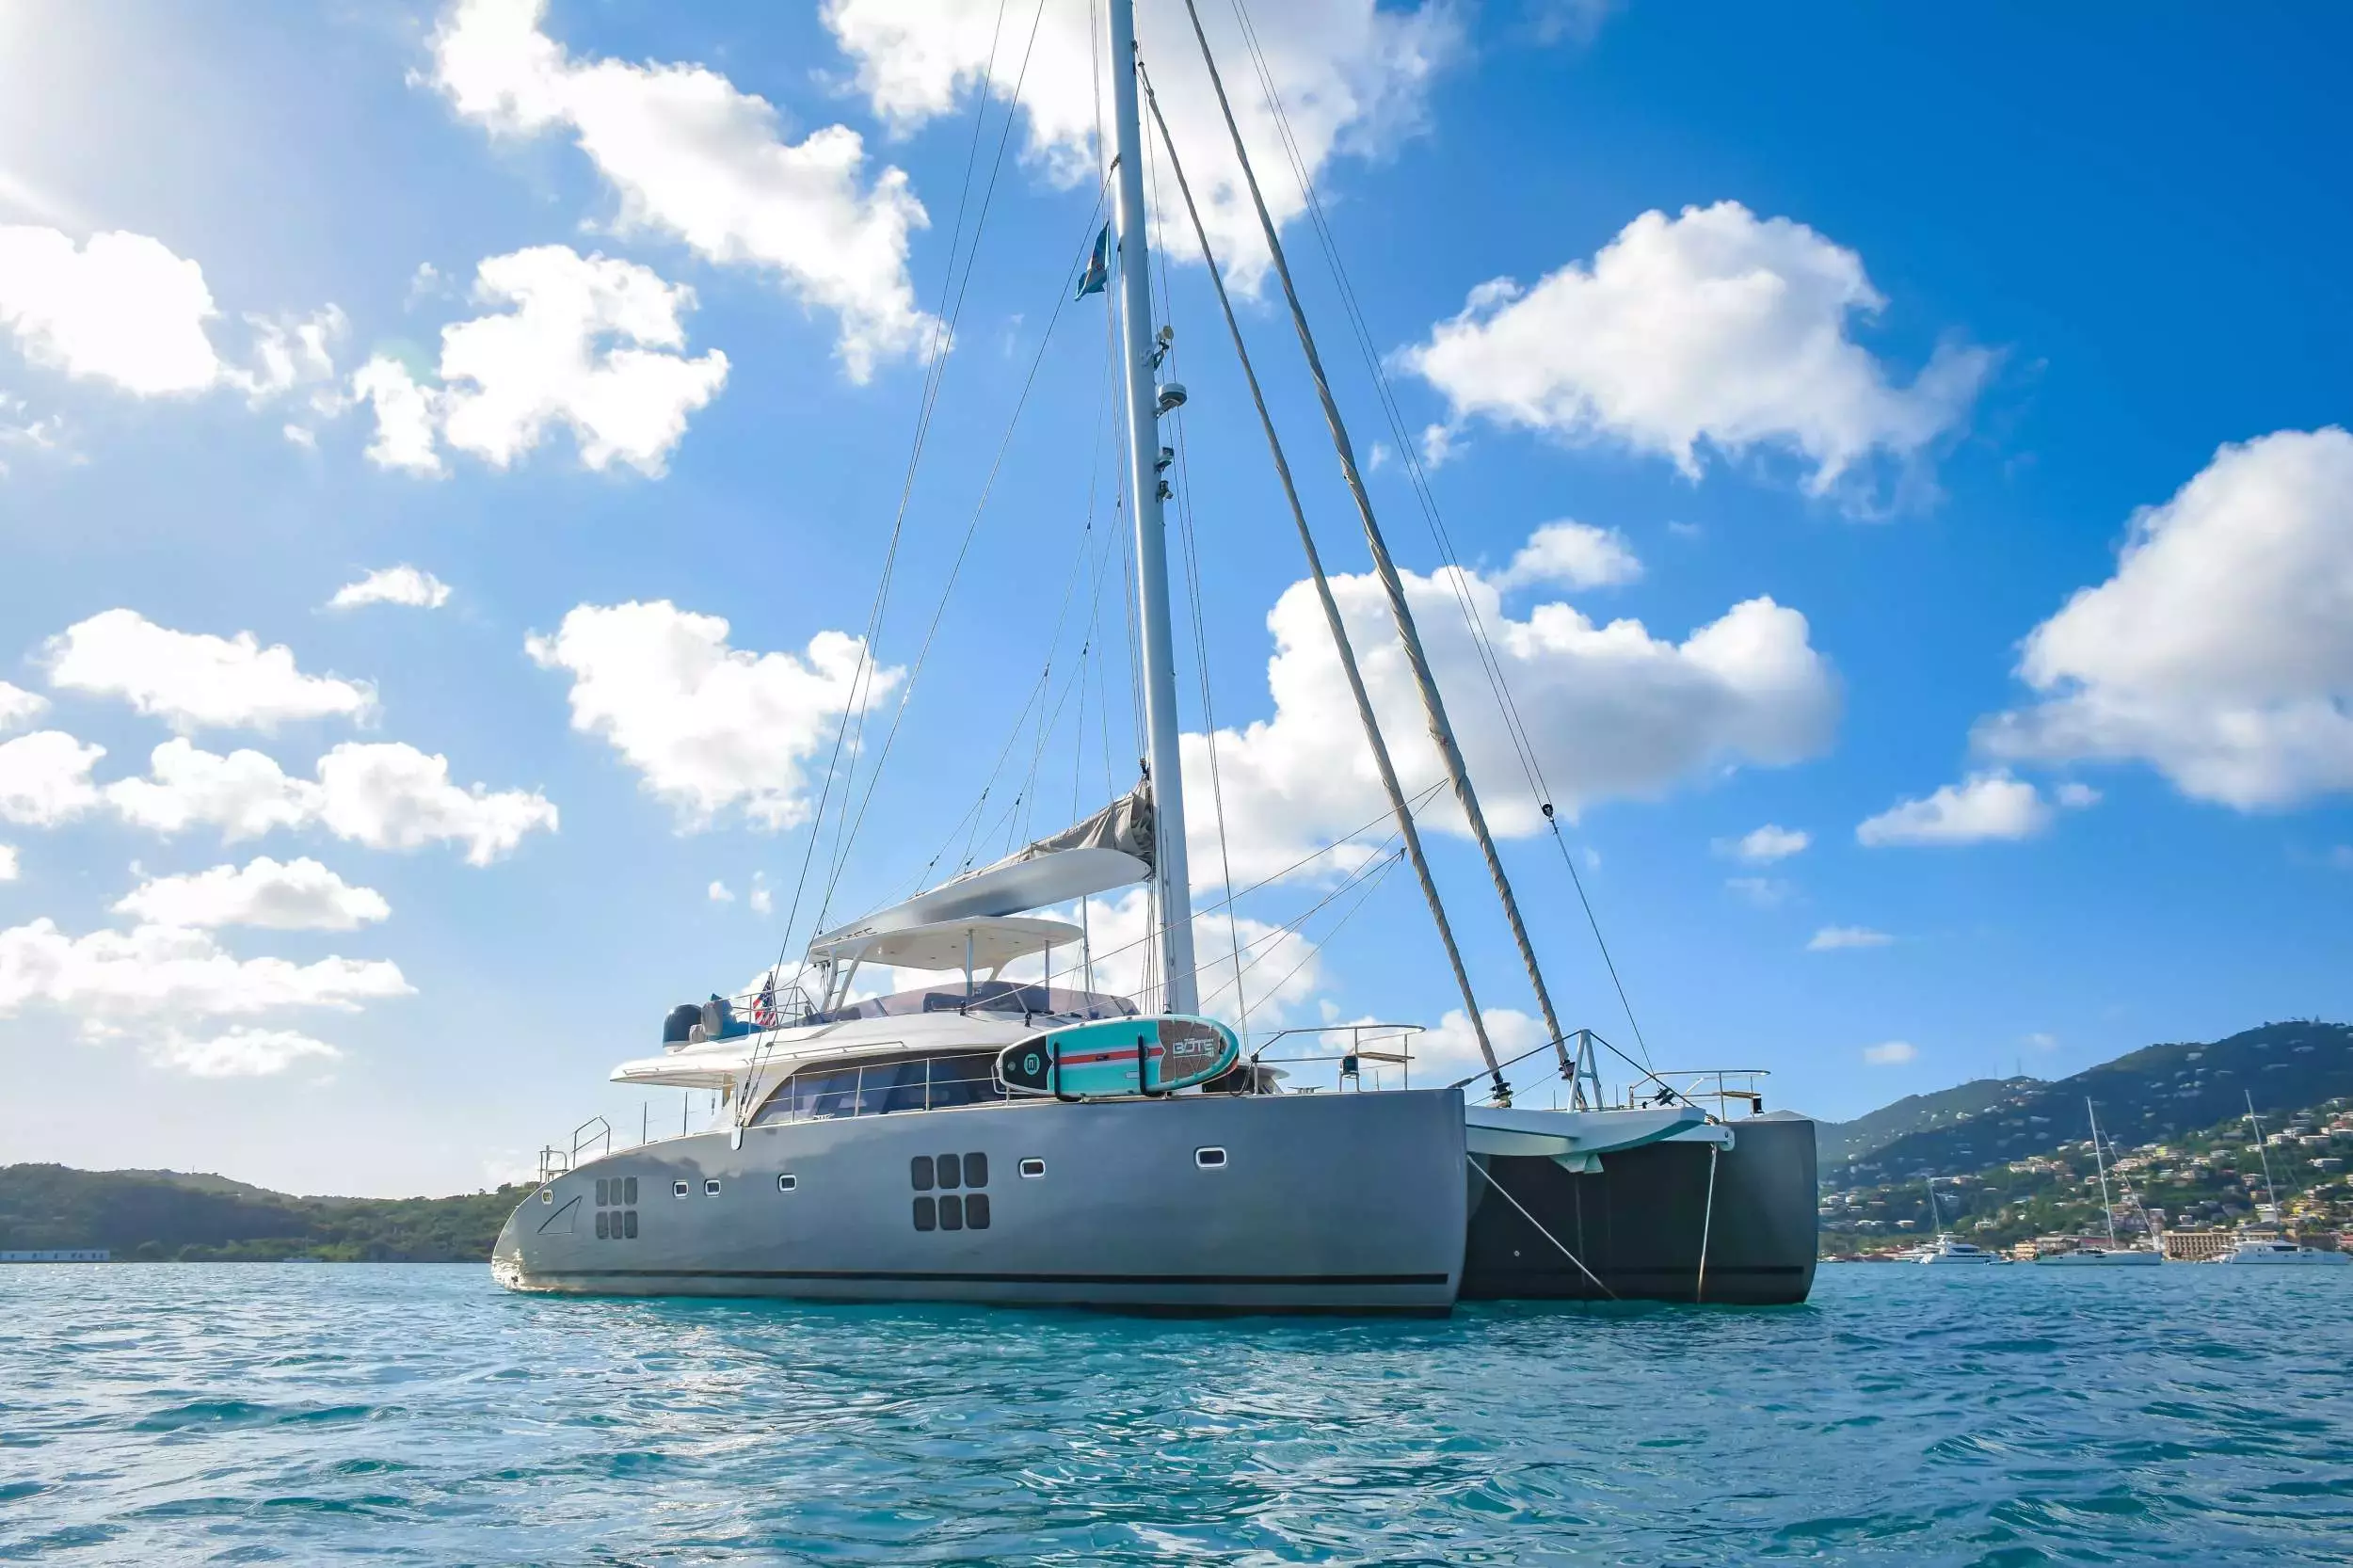 Excess by Sunreef Yachts - Special Offer for a private Luxury Catamaran Charter in Tortola with a crew